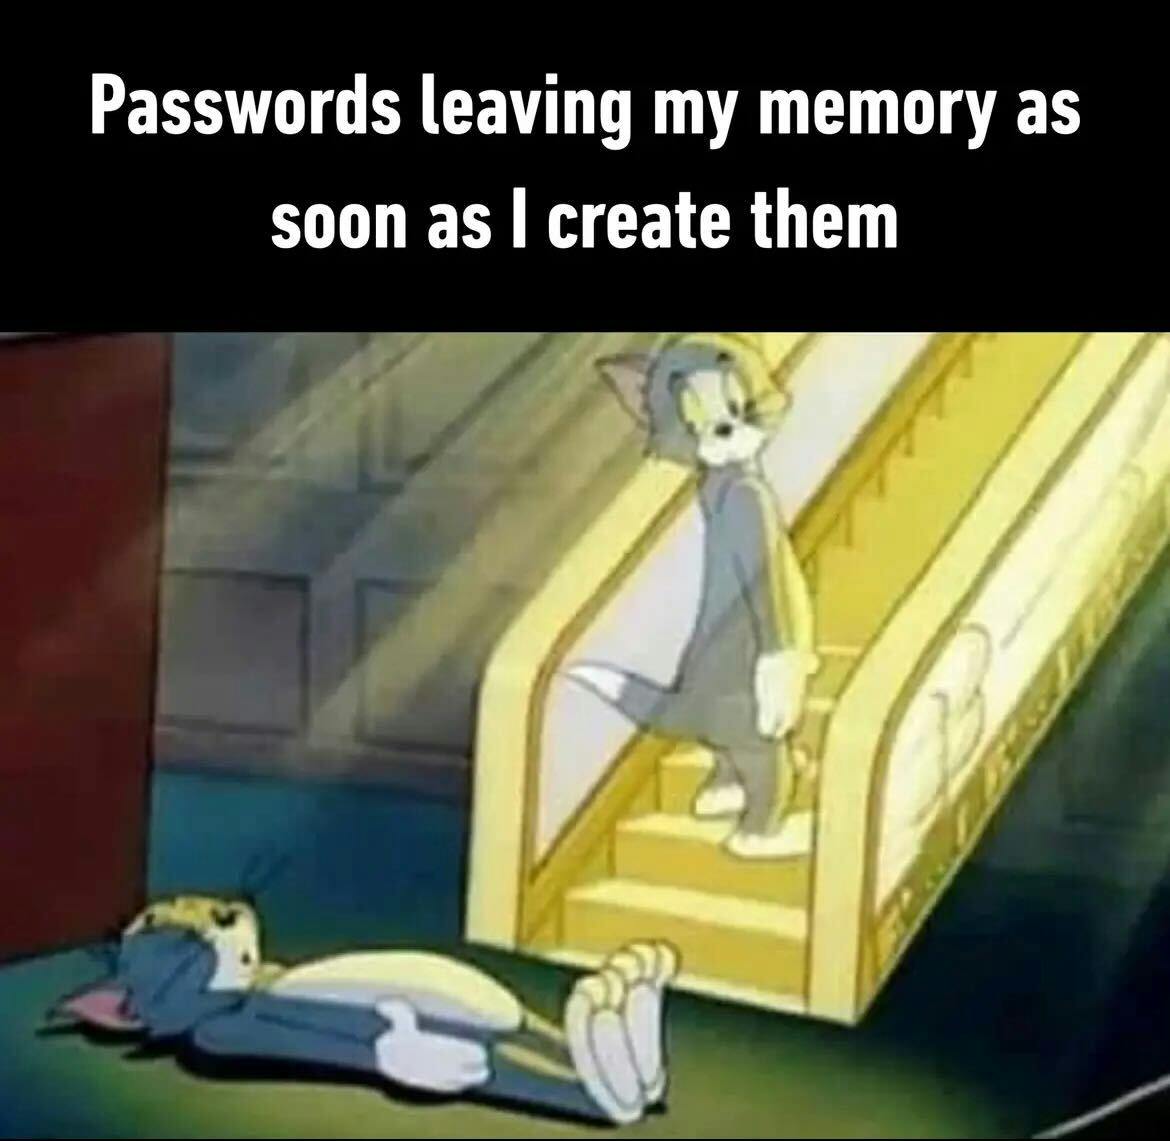 Passwords leaving my memory as soon as I create them